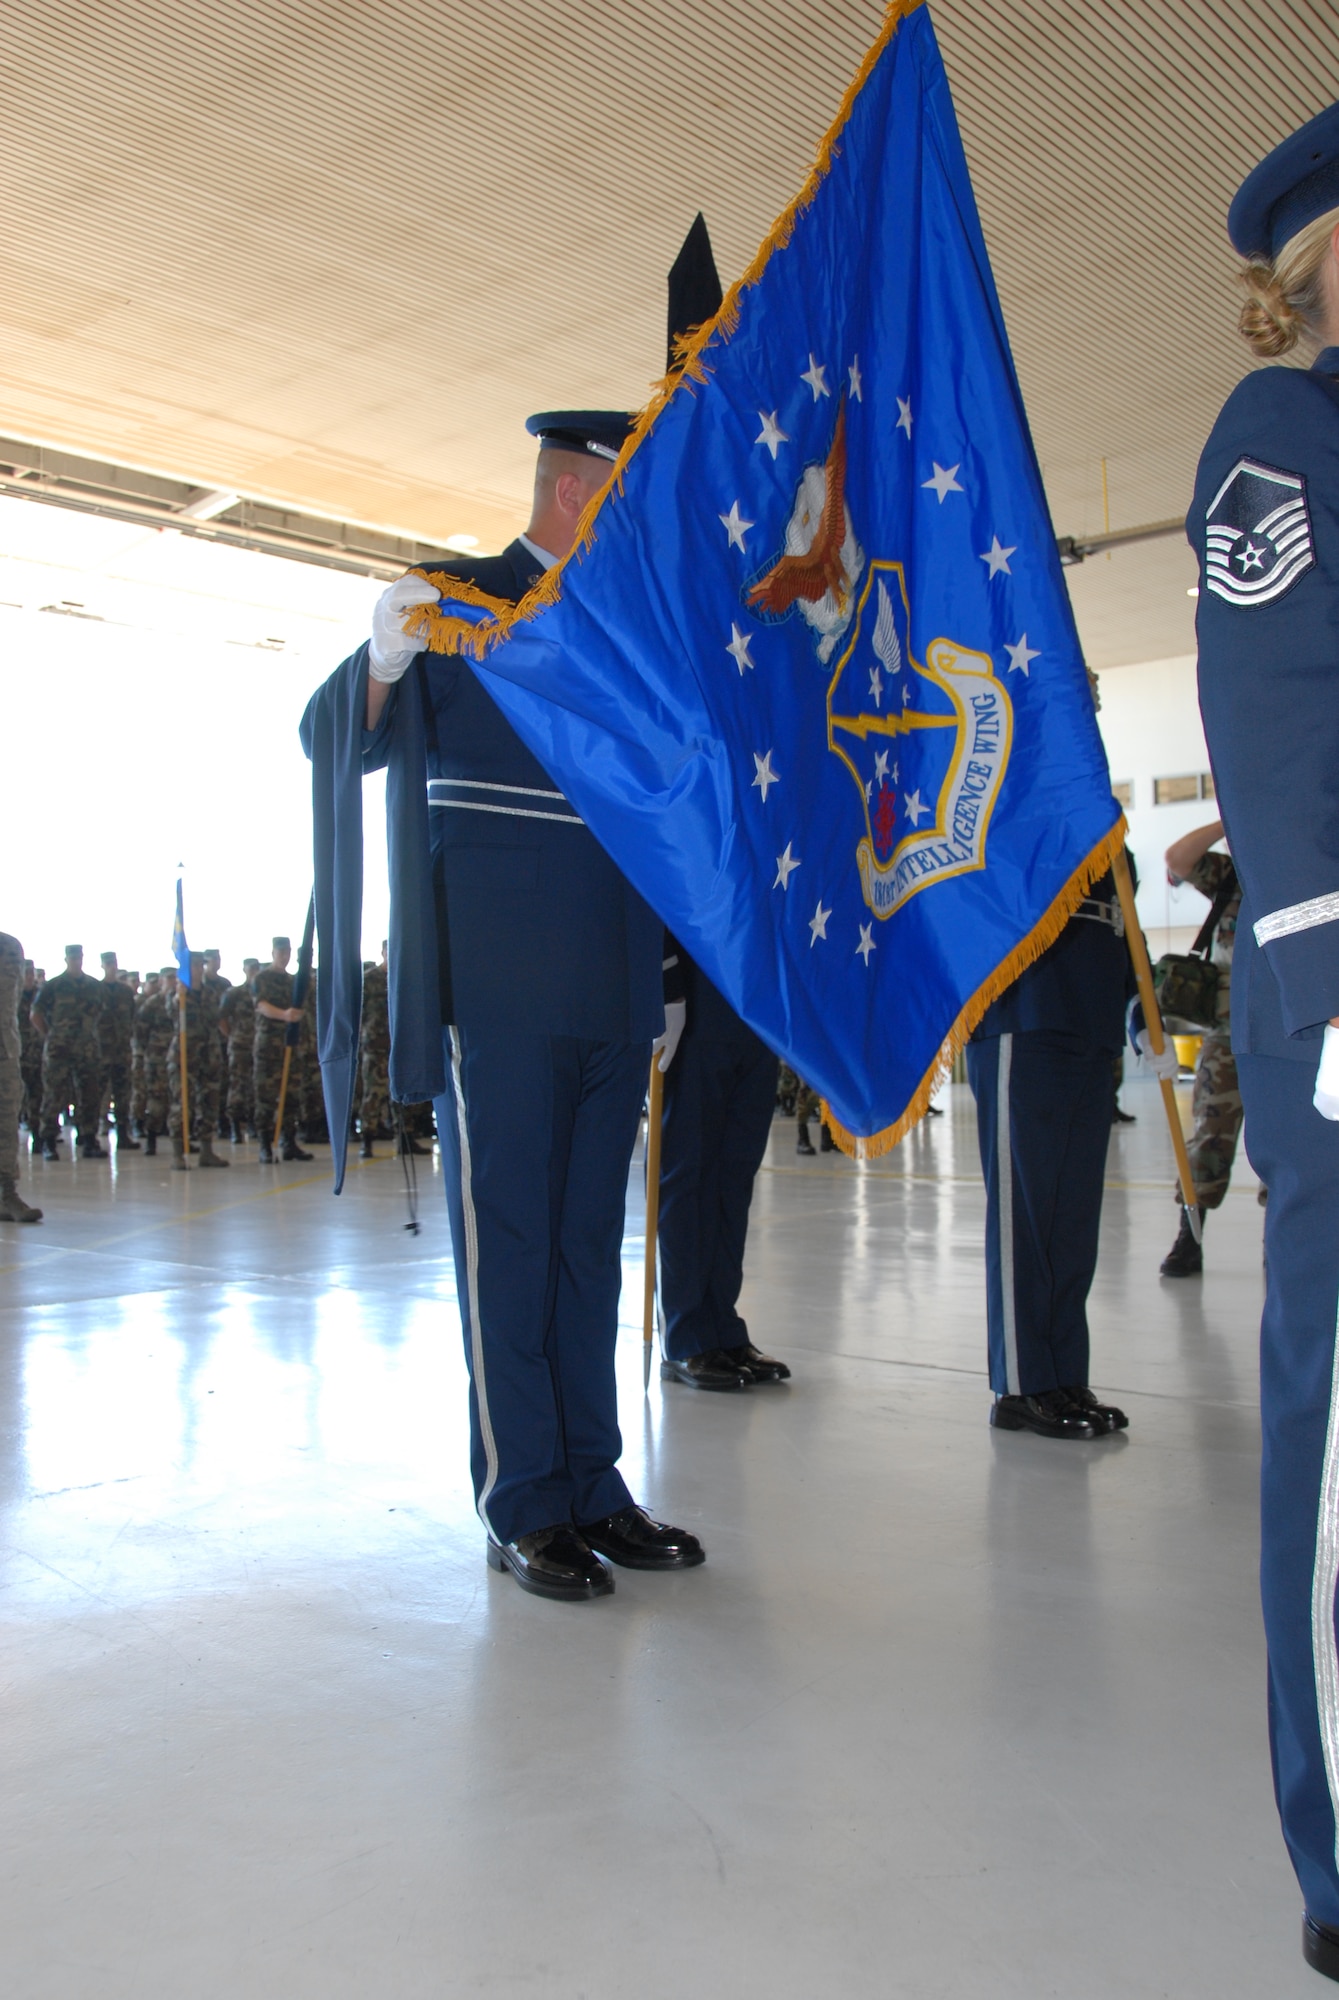 The 181st Fighter Wing, Terre Haute, Ind., conducted a redesignation ceremony on 13 July, 2008 officially marking its transition from flying jets to processing intelligence and providing ground support to air operations at forward locations. Honor guard members unfurl new unit flag. U.S. Air force photo by TSgt Michael W. Kellams.